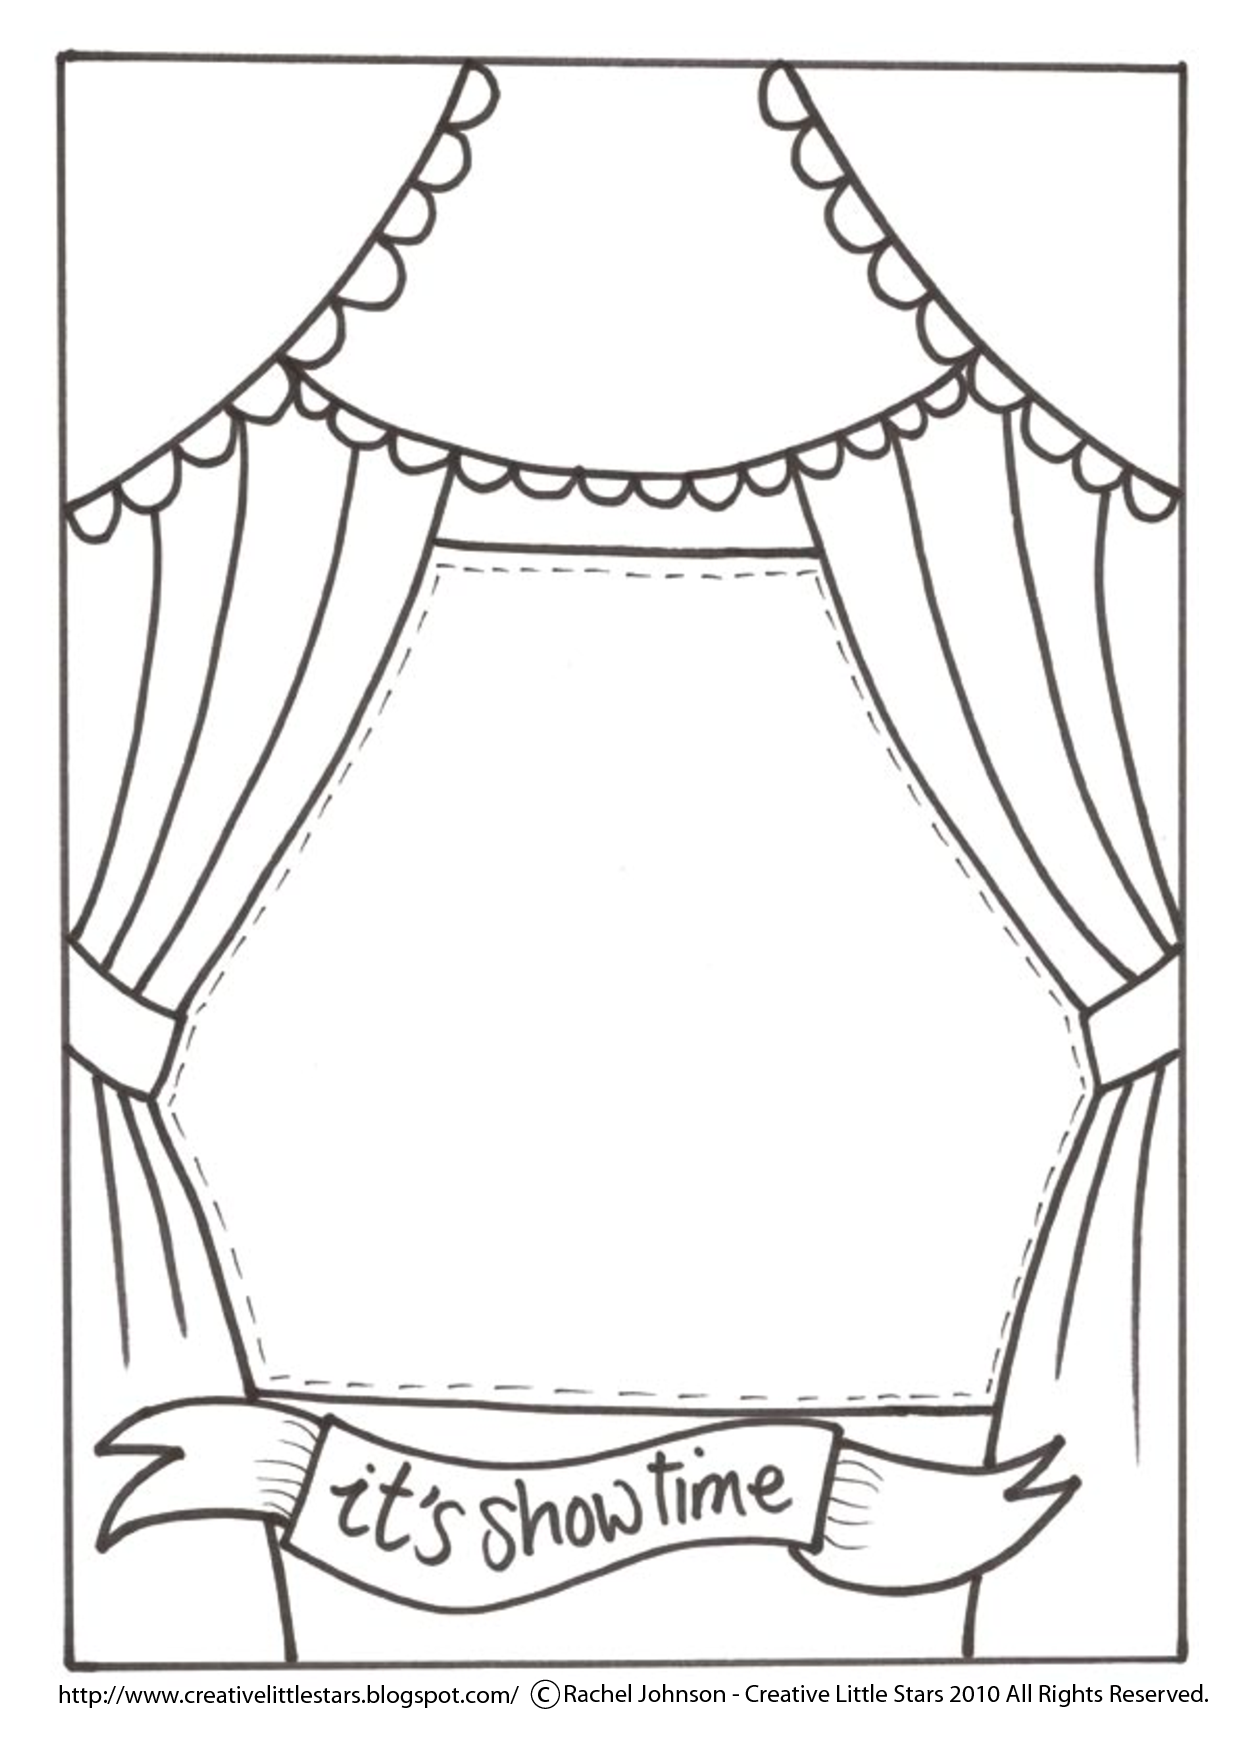 Theatre stage coloring pages dance coloring pages coloring pages theatre crafts